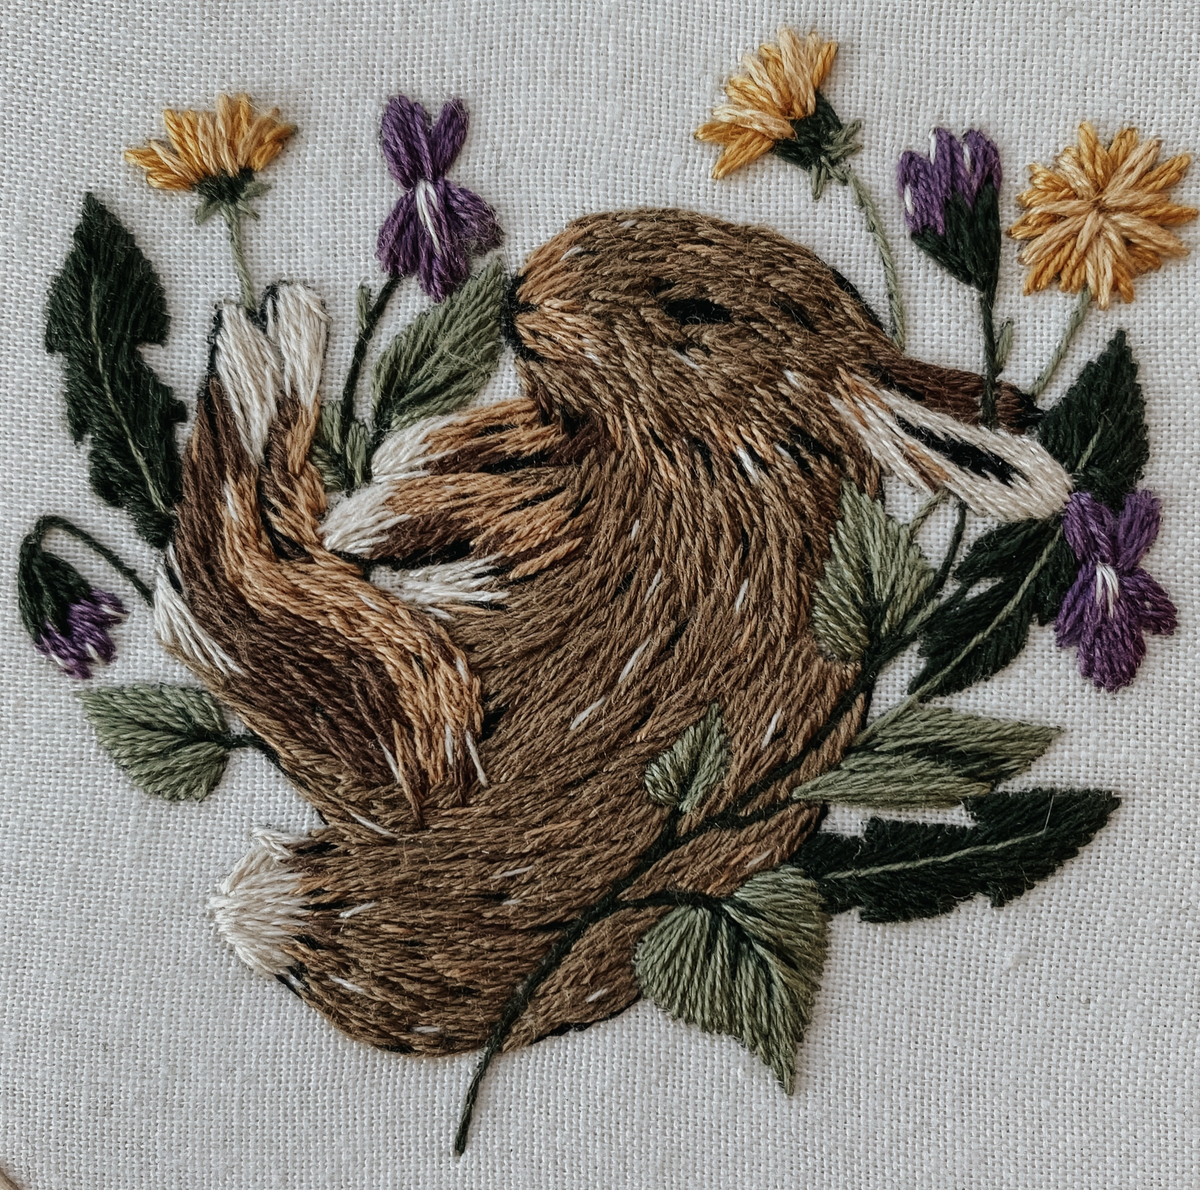 Rest & Renewal Embroidery Kit